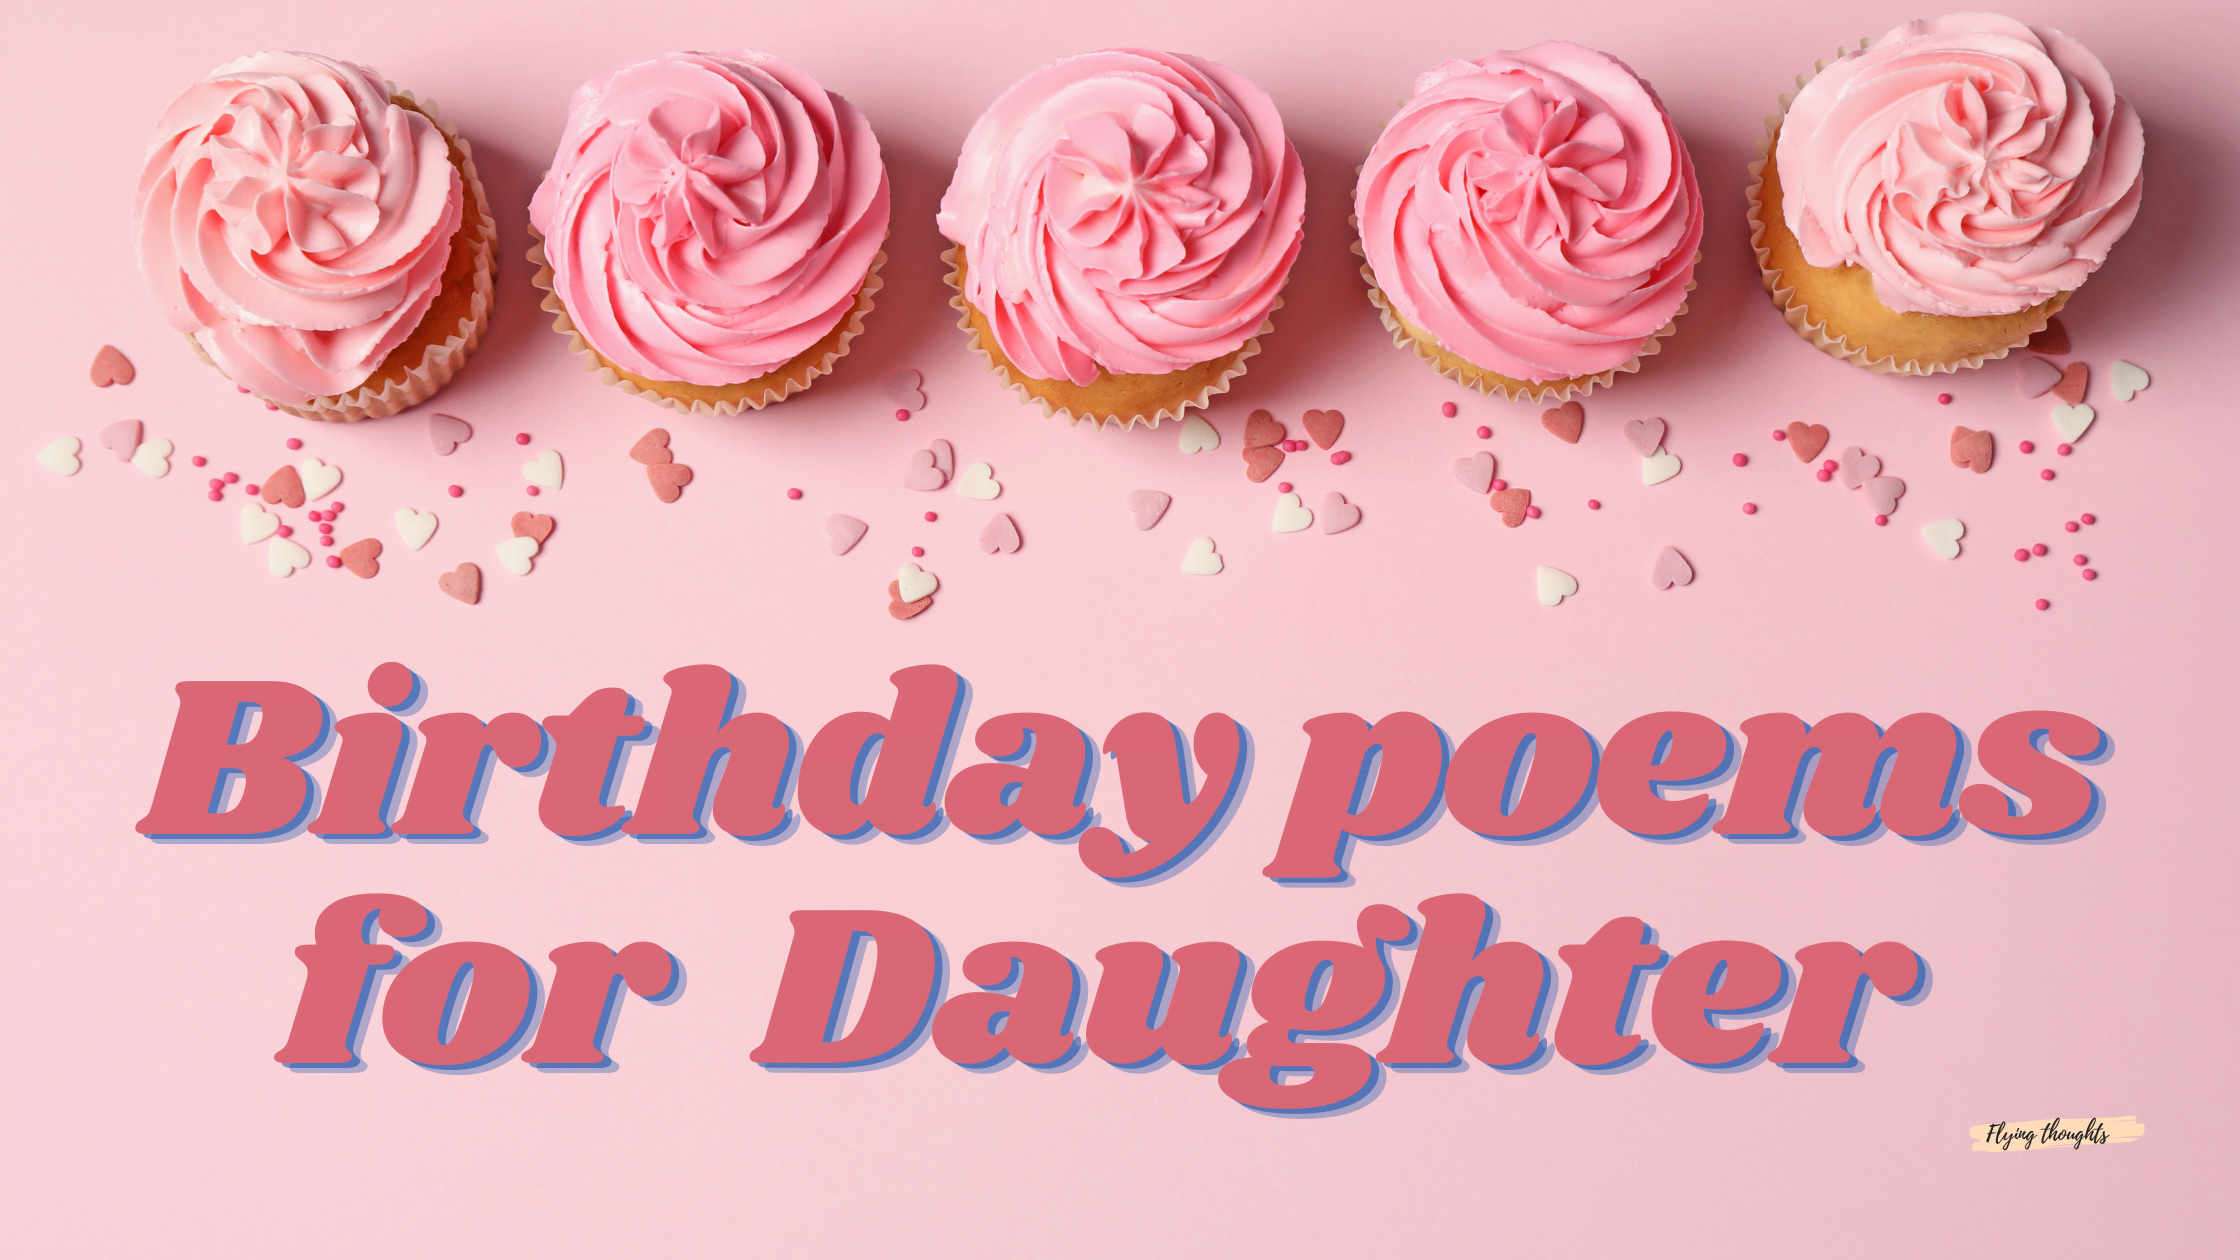 Birthday Poems for Daughter: Creating Beautiful Moments